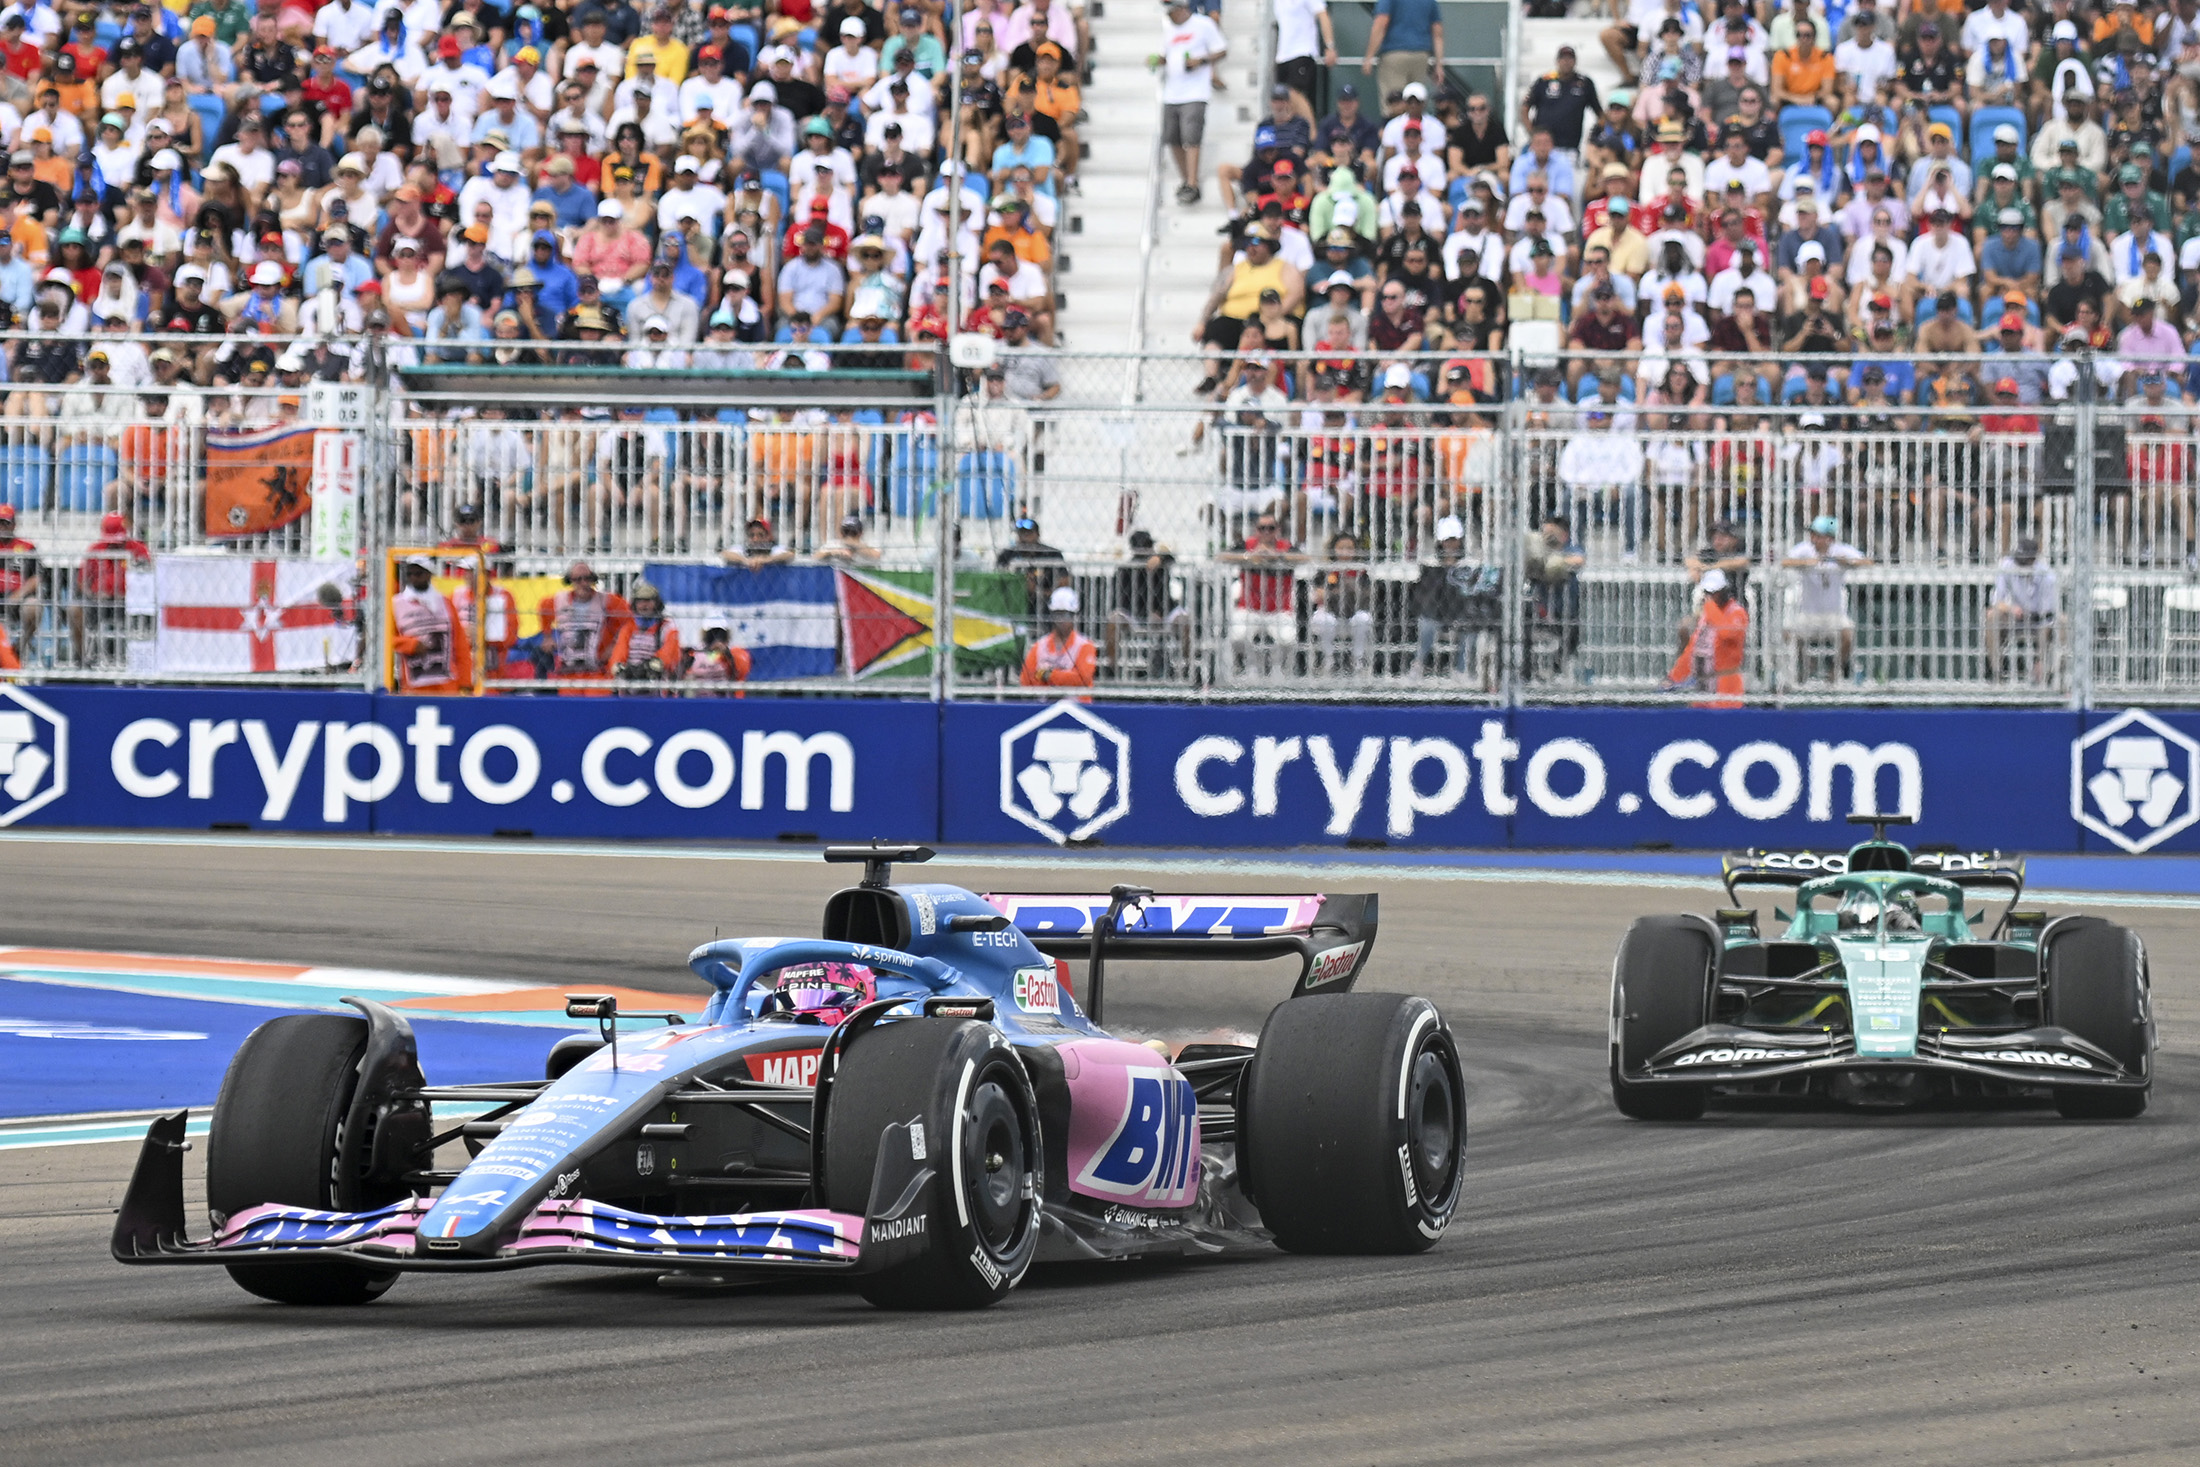 Why crypto fan tokens are coming to Formula 1